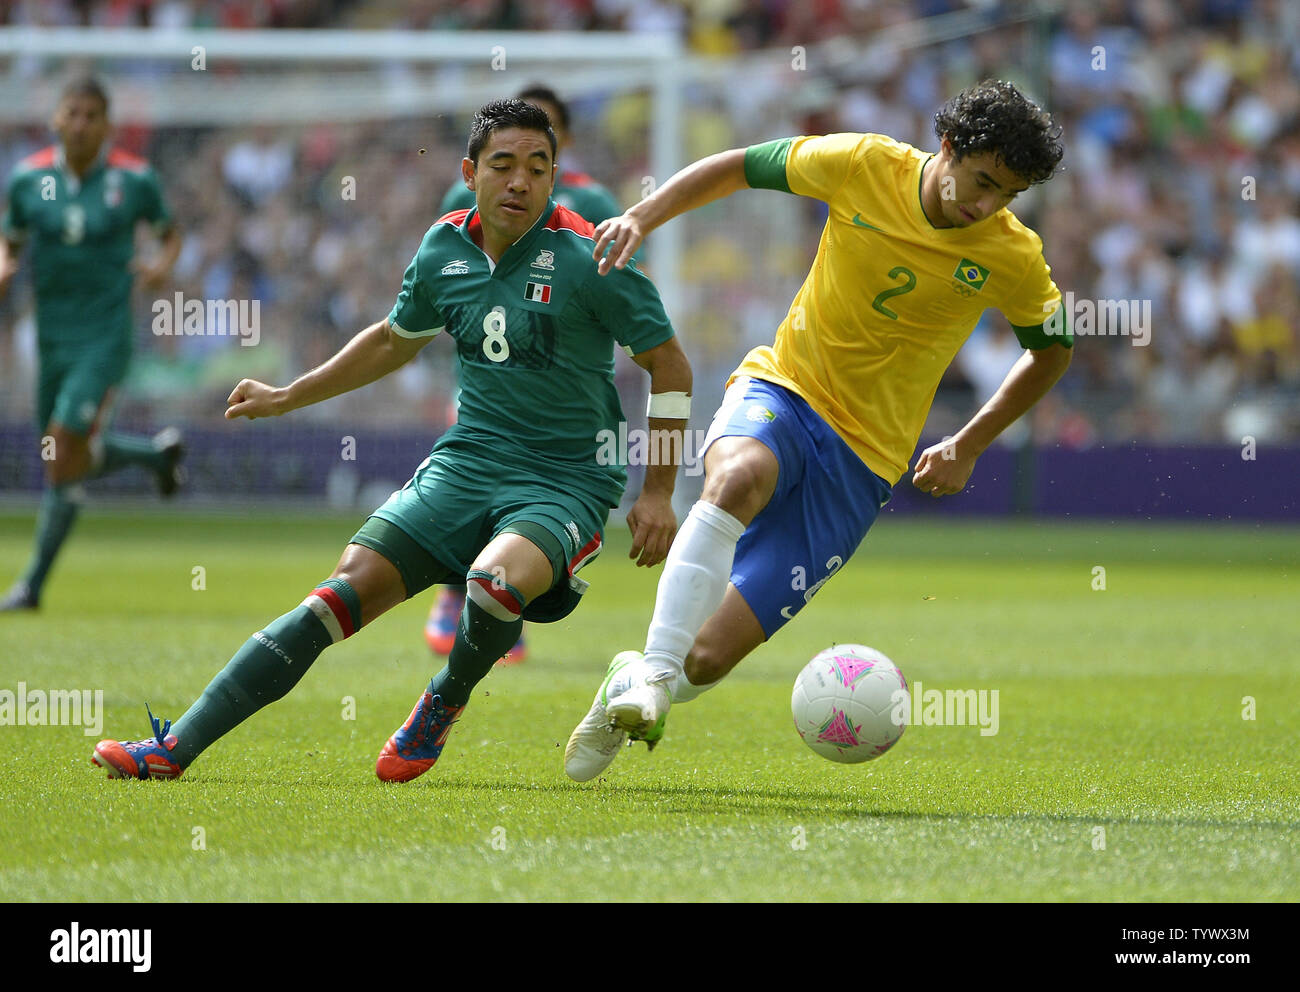 Forward Marco Fabian of Mexico and defender Rafael of Brazil go for the ball  during the first half of the Gold Medal Football Match at the London 2012 Summer Olympics on August 11, 2012 at Wembley Stadium, London.      UPI/Brian Kersey Stock Photo